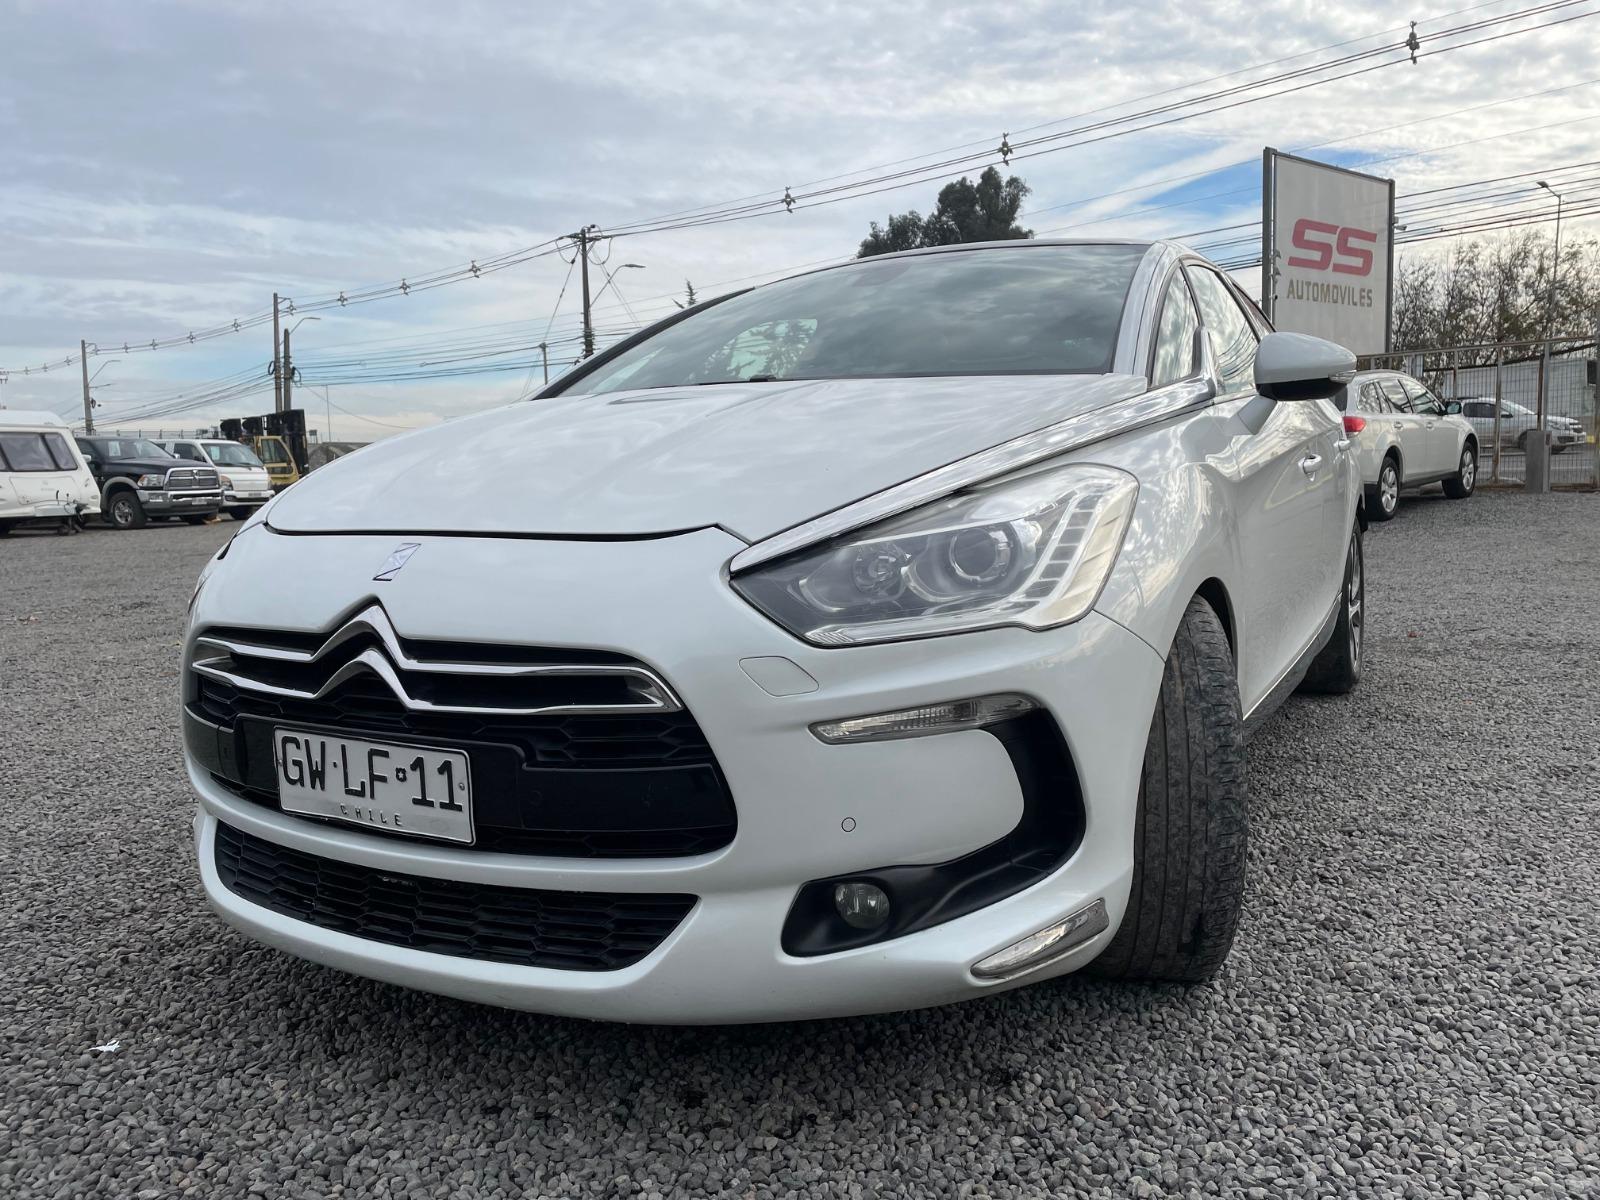 CITROËN DS5 DS5 N2 HDI 2.0 AT 2015 Citroën DS5 - FULL MOTOR